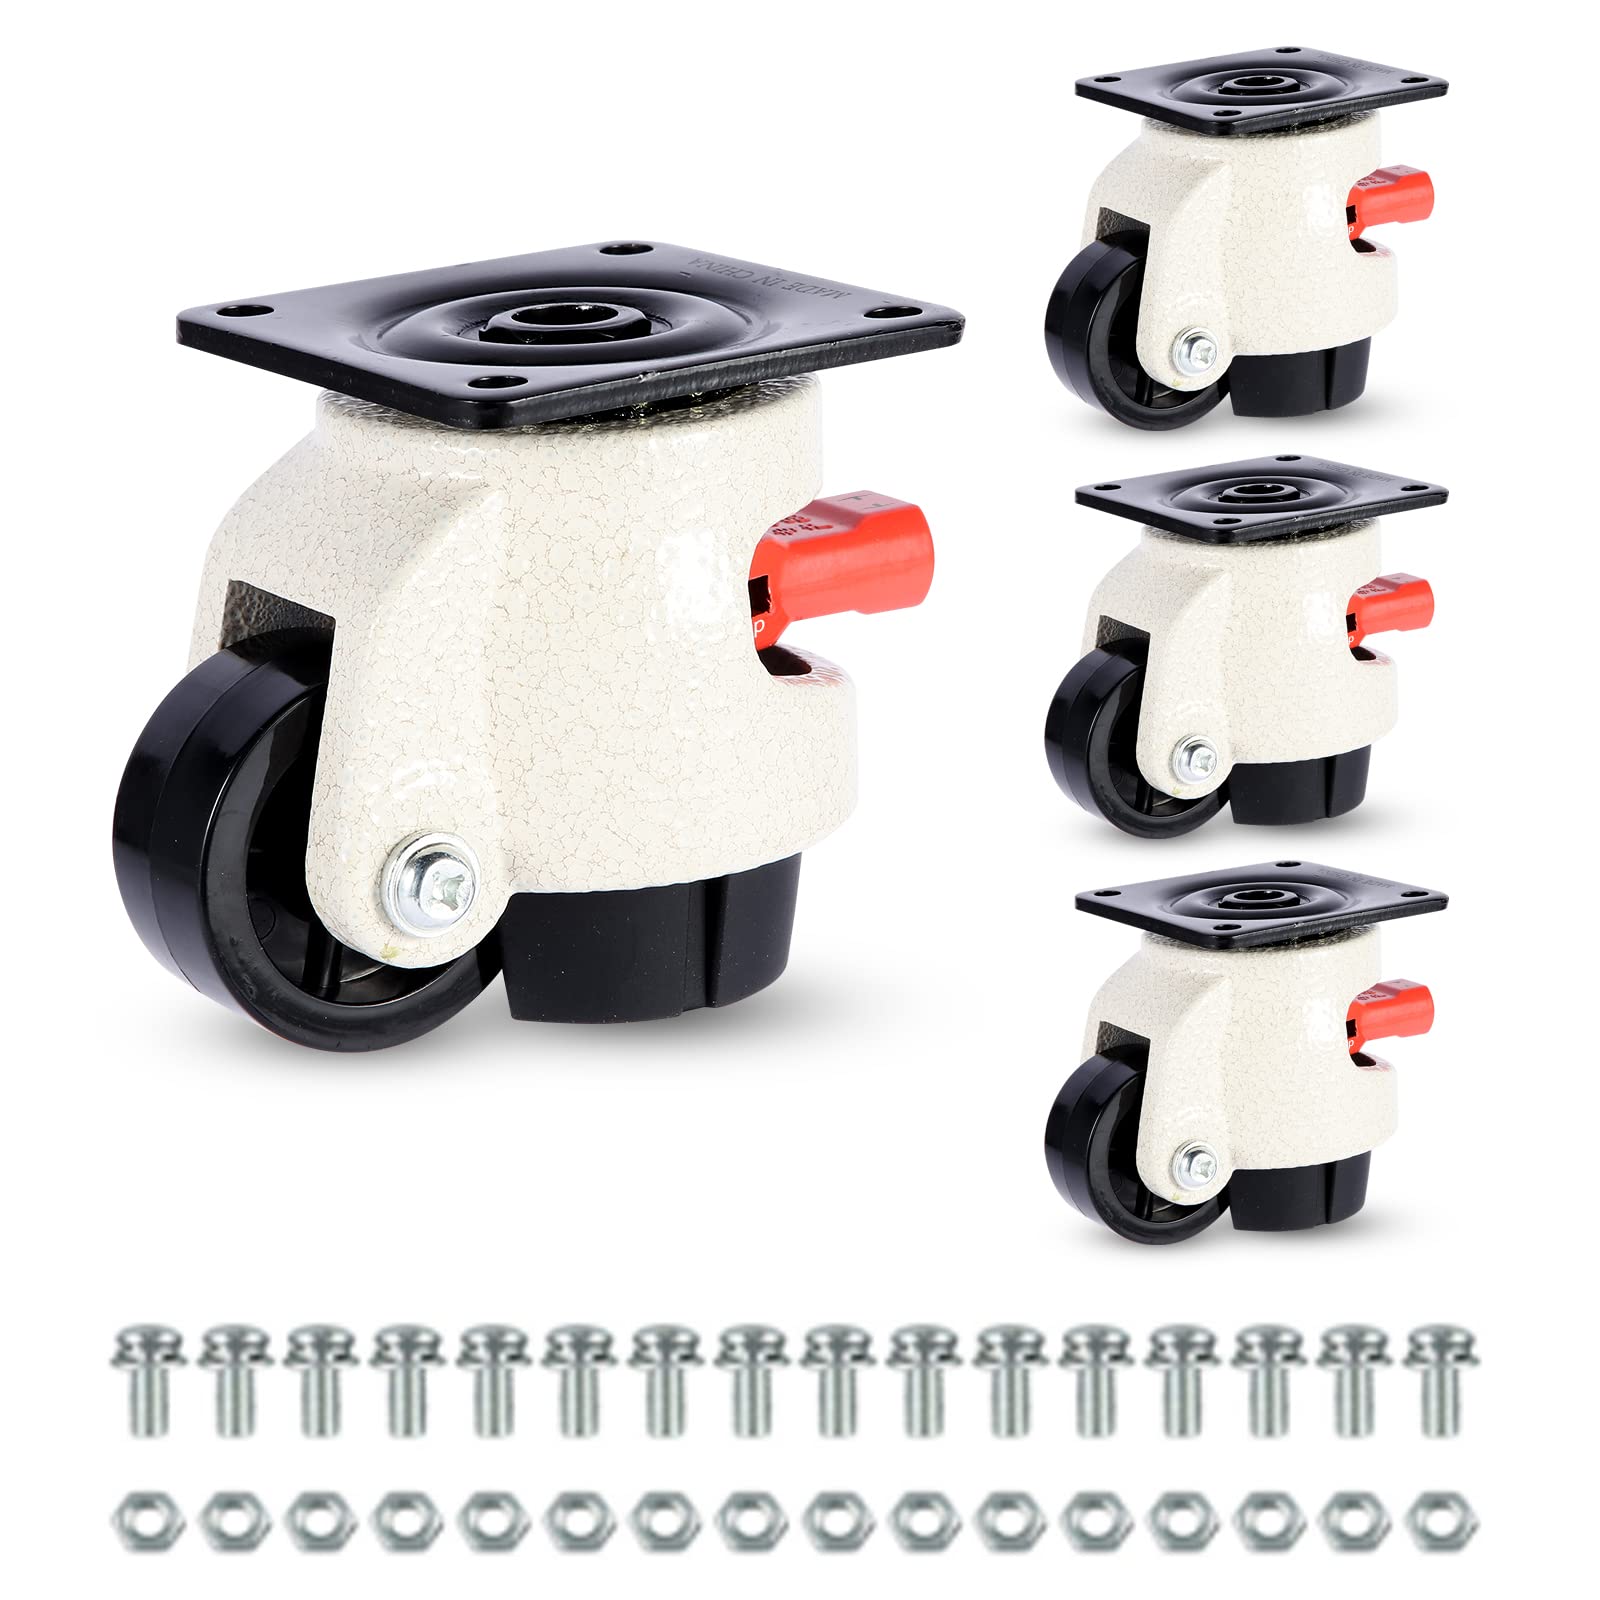 W B D WEIBIDA Leveling Casters Heavy Duty with Upgraded Ratchet Handle Design, 360 Degree Swivel Castor Wheels, Adjustable Casters with Feet for Workbench, Machine, Total Capacity 2200 Lbs (4 Pack)